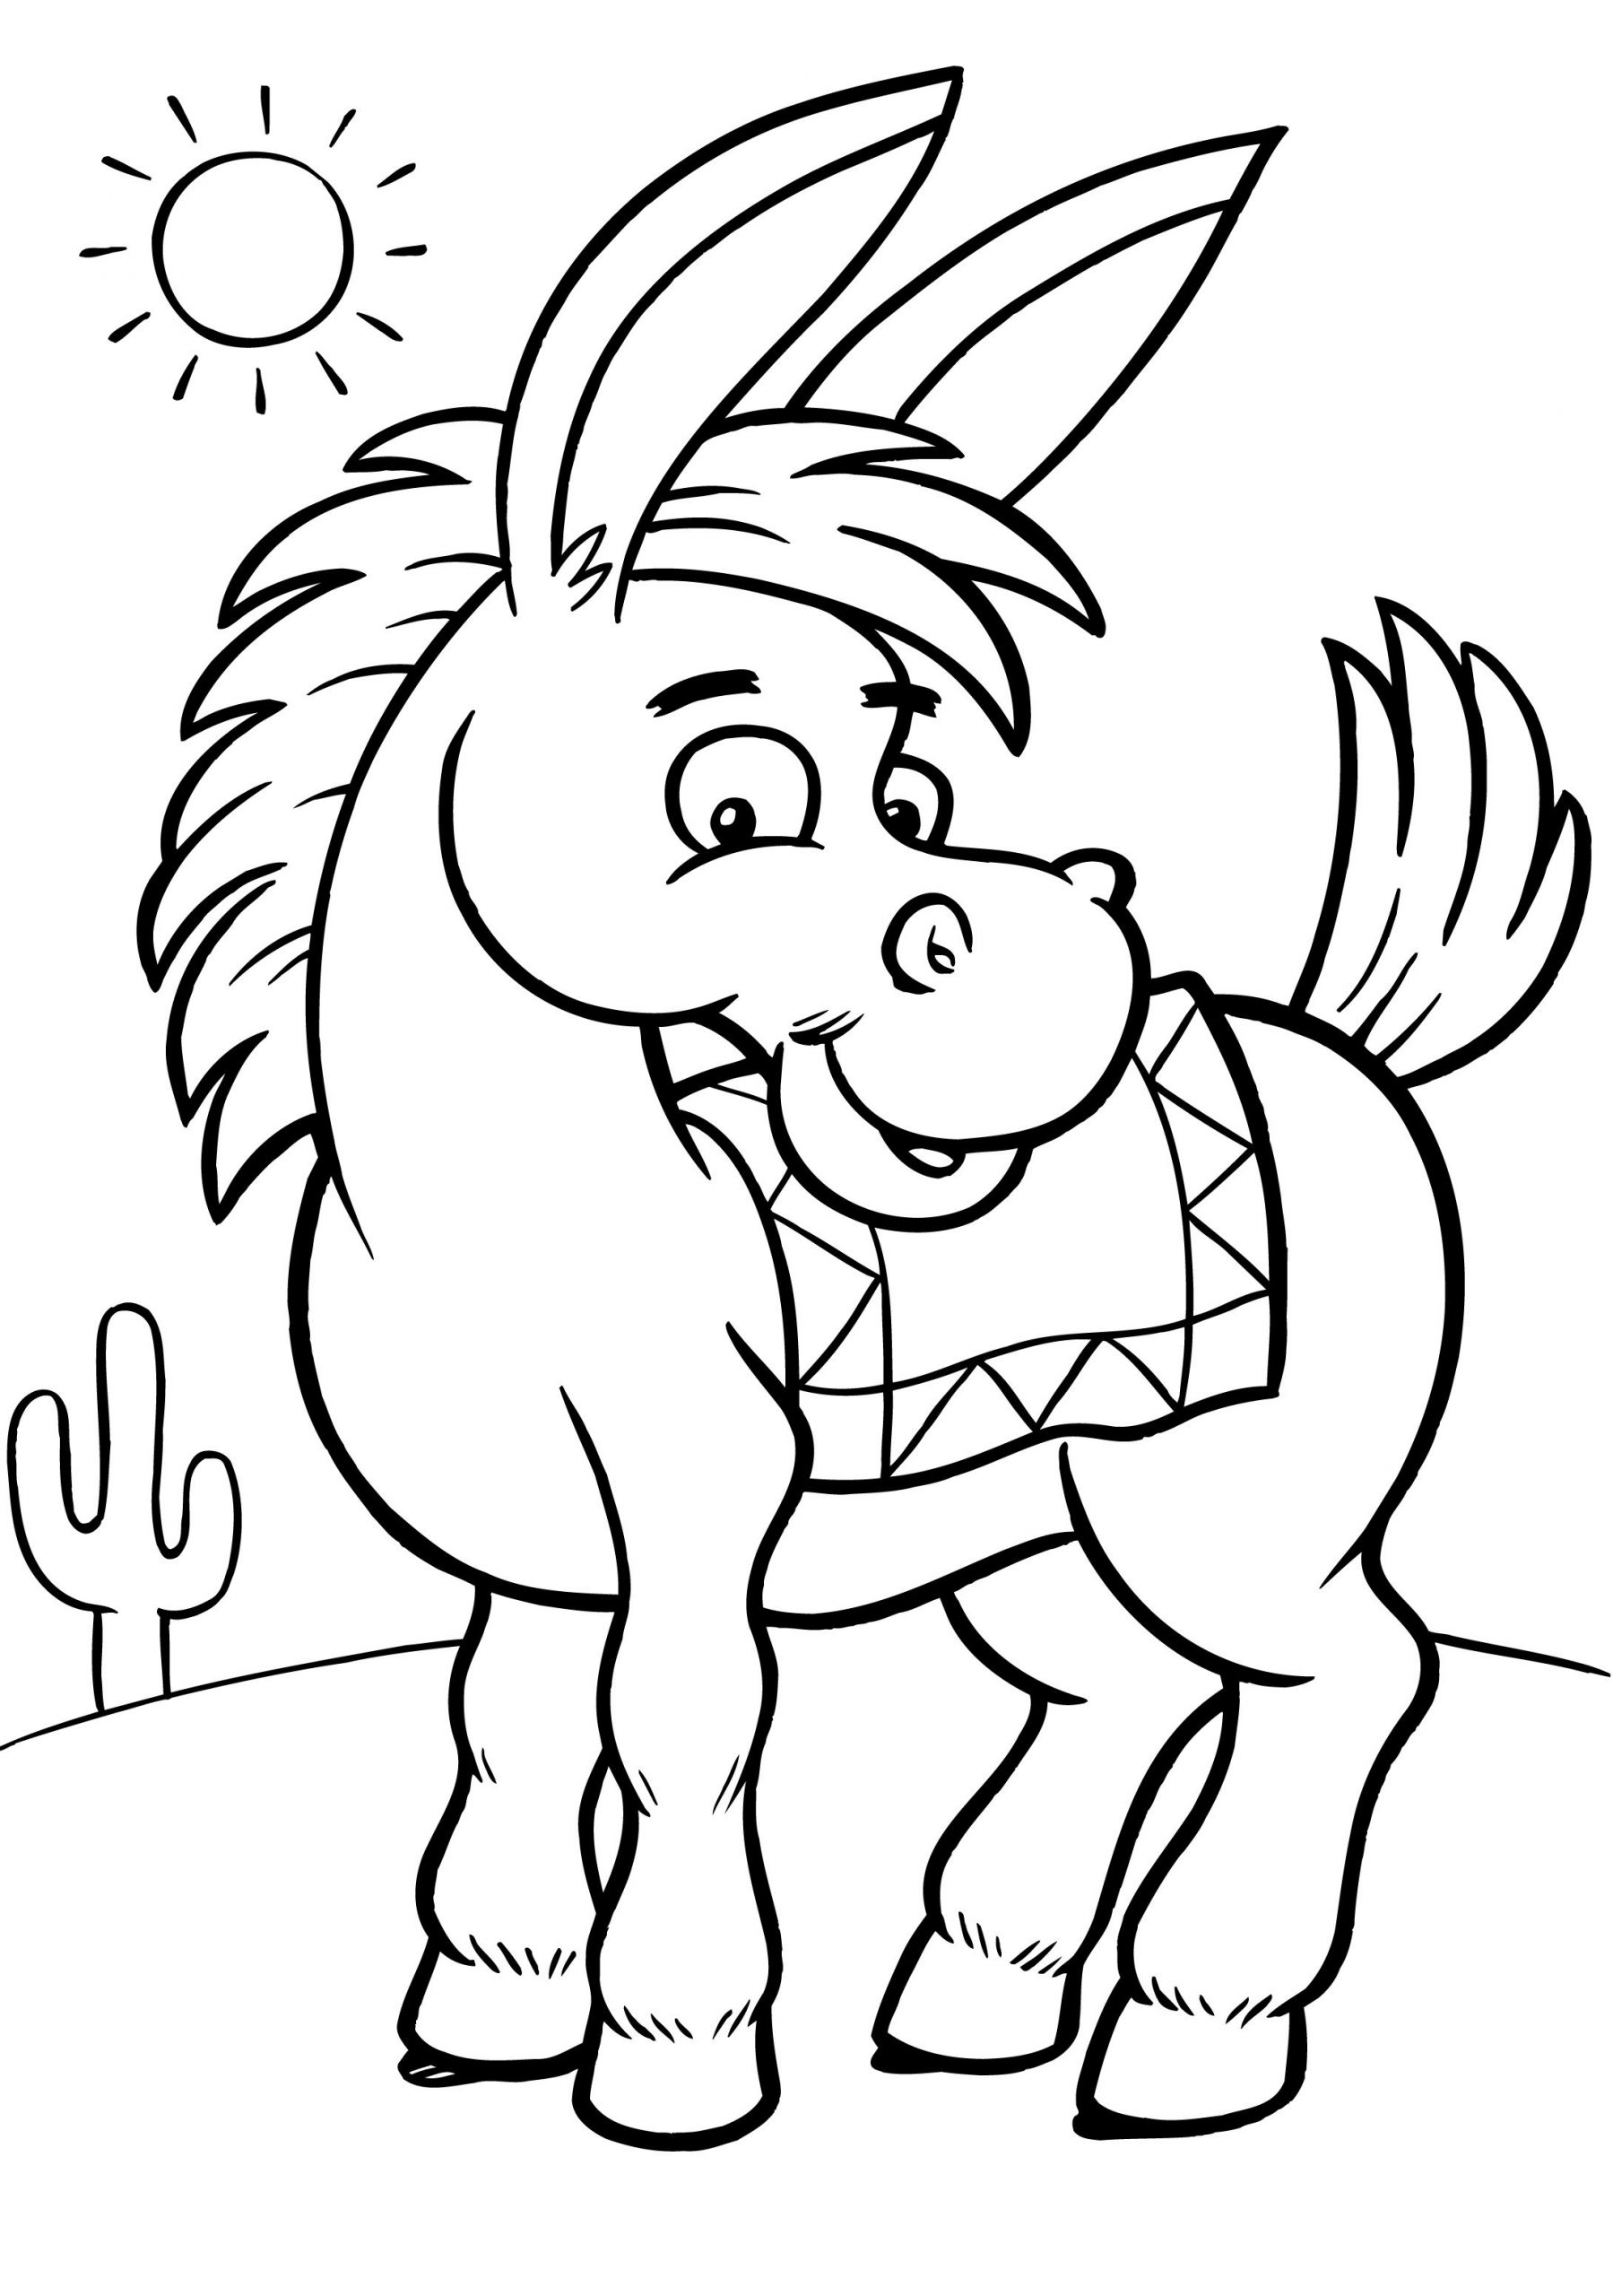 Online Coloring Book For Kids
 Free Printable Donkey Coloring Pages For Kids